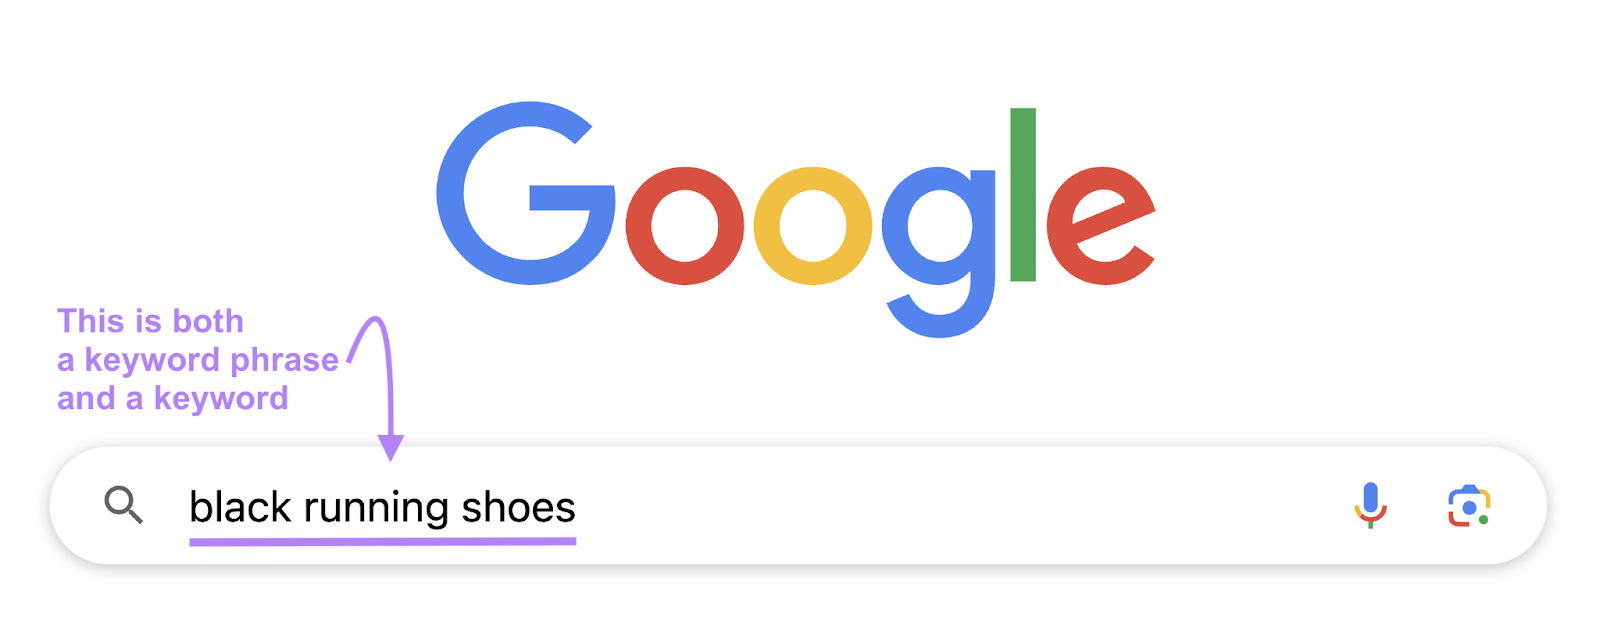 "black running shoes" keyword entered into Google search